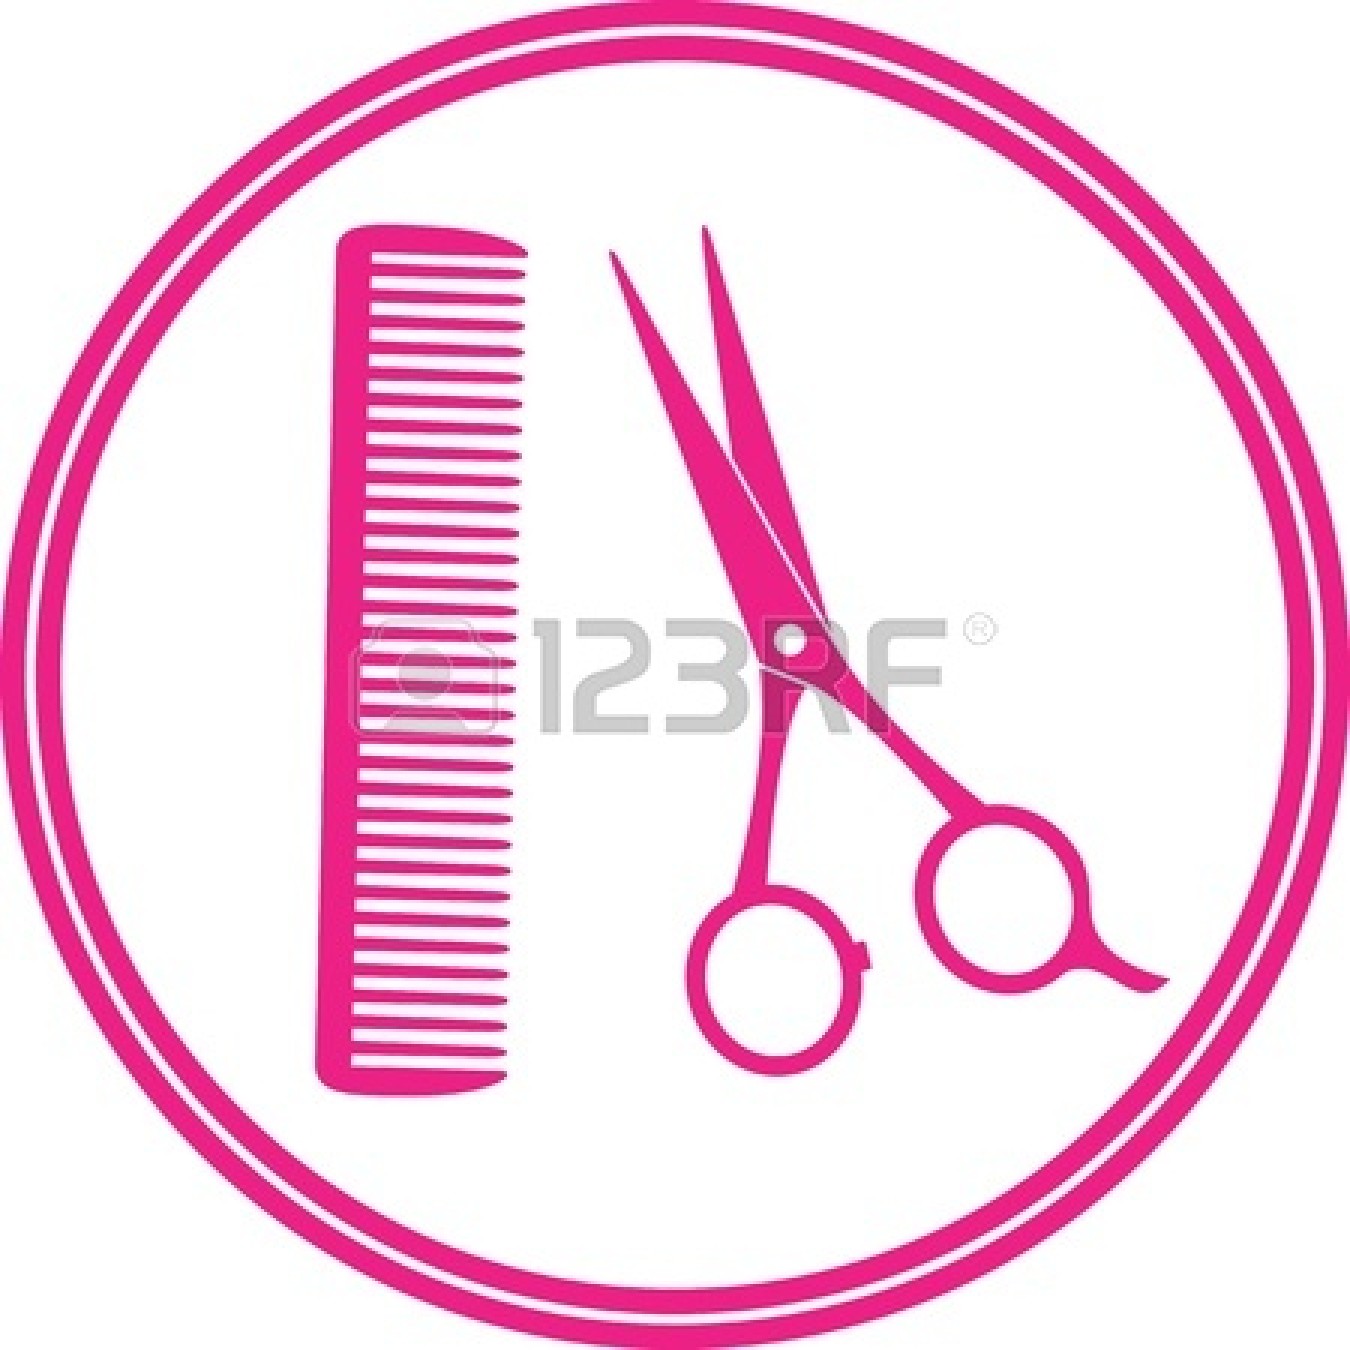 Hair Scissors And Comb 18087553 Round Icon Of Hair Salon With Scissors